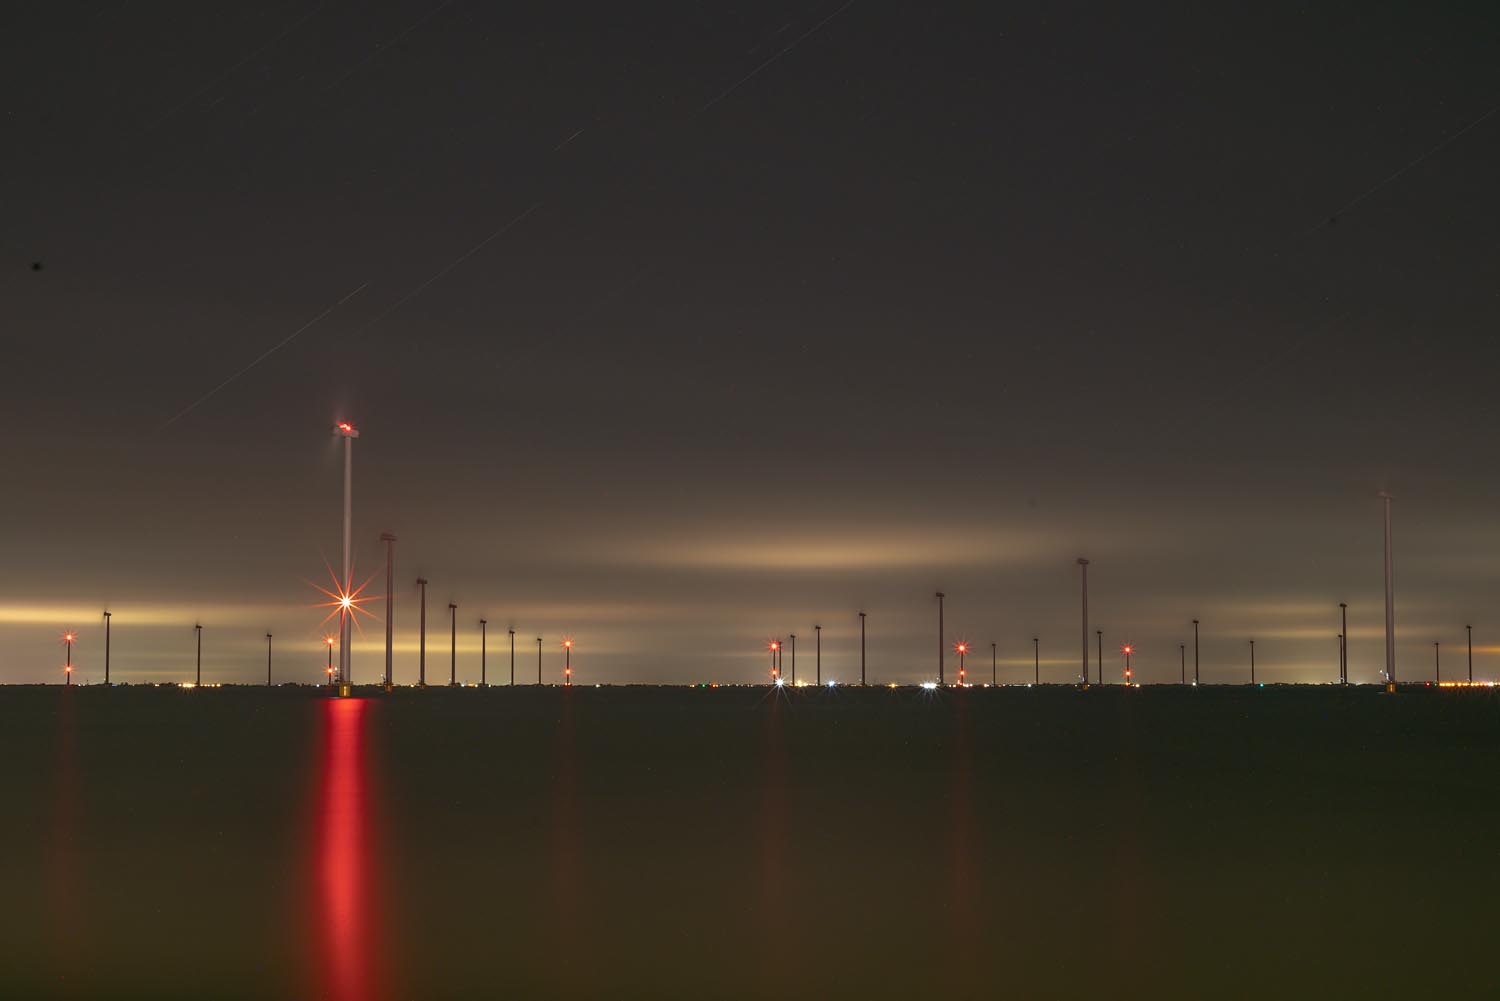 Sites at Risk of Climate Change: Night Landscape Photographs in The Netherlands, Steve Giovinco, Wind Farm Sustainable Energy with Glowing Red Light Fryslan, Flevoland